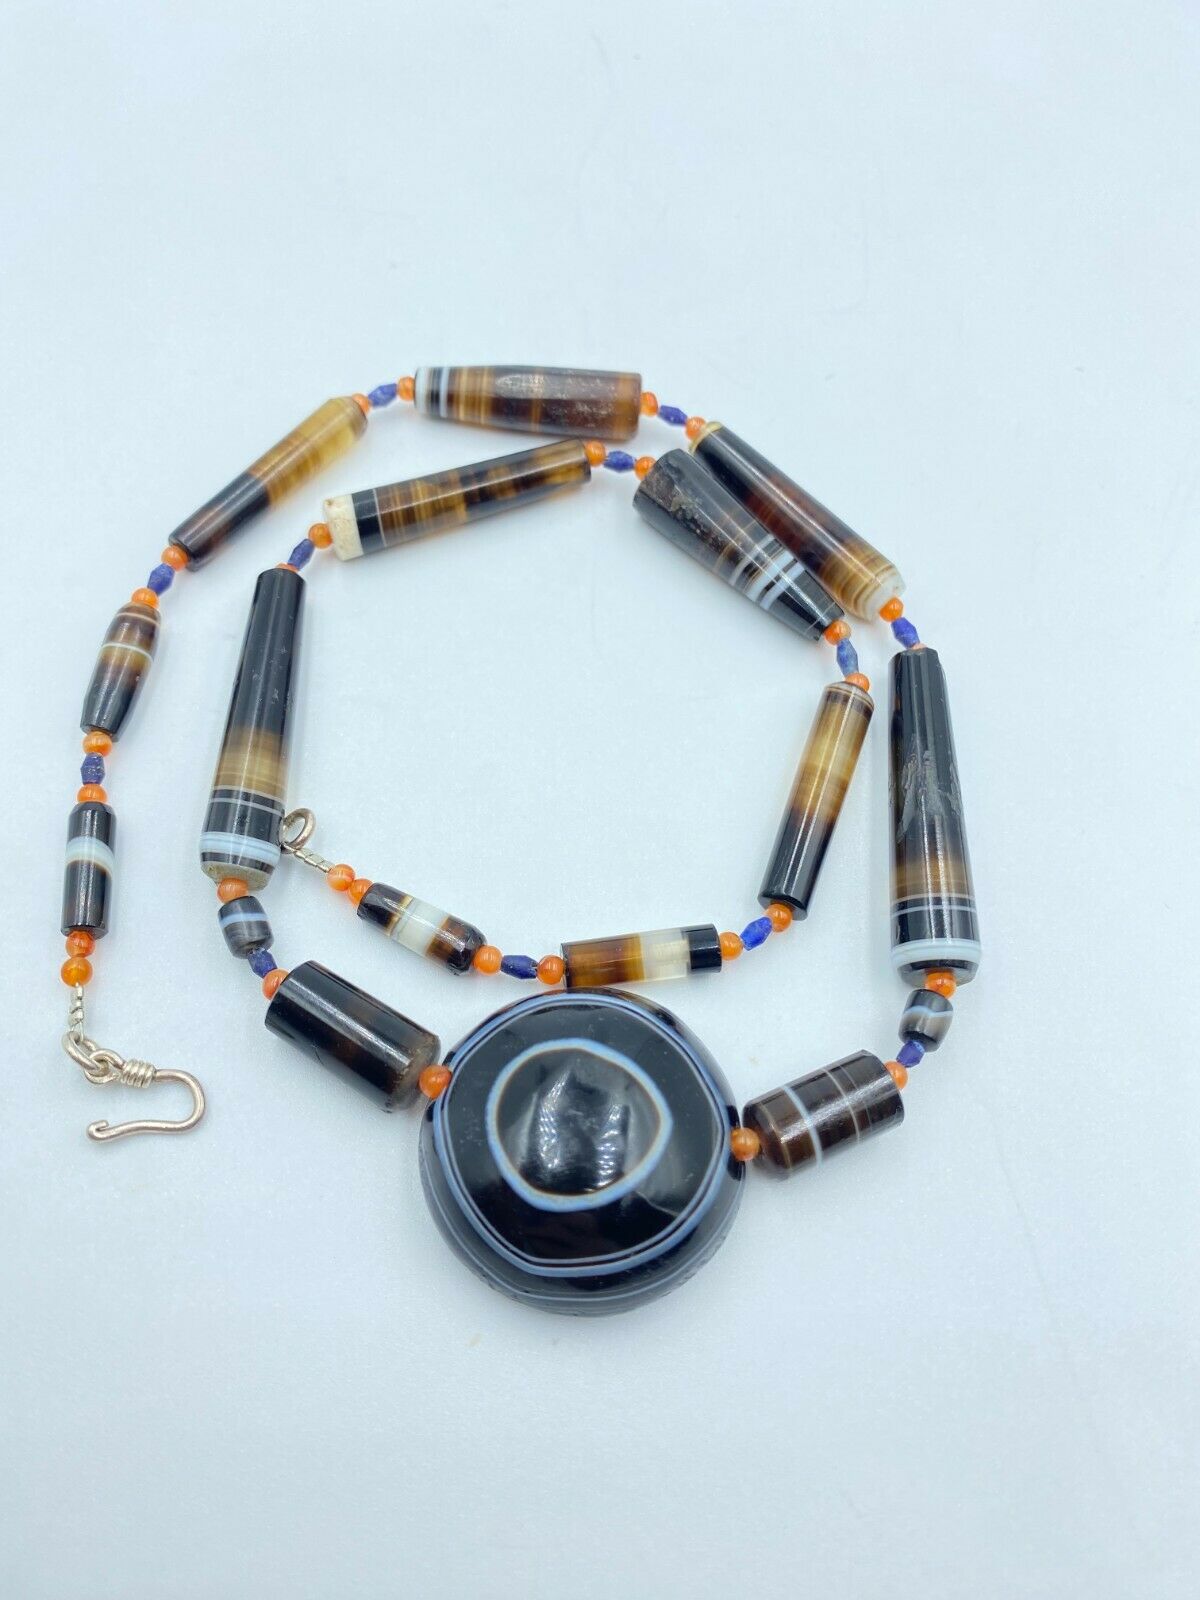 Old Ancient Banded Long Agates And Magic Eye Amulet Pendant Beads Necklace